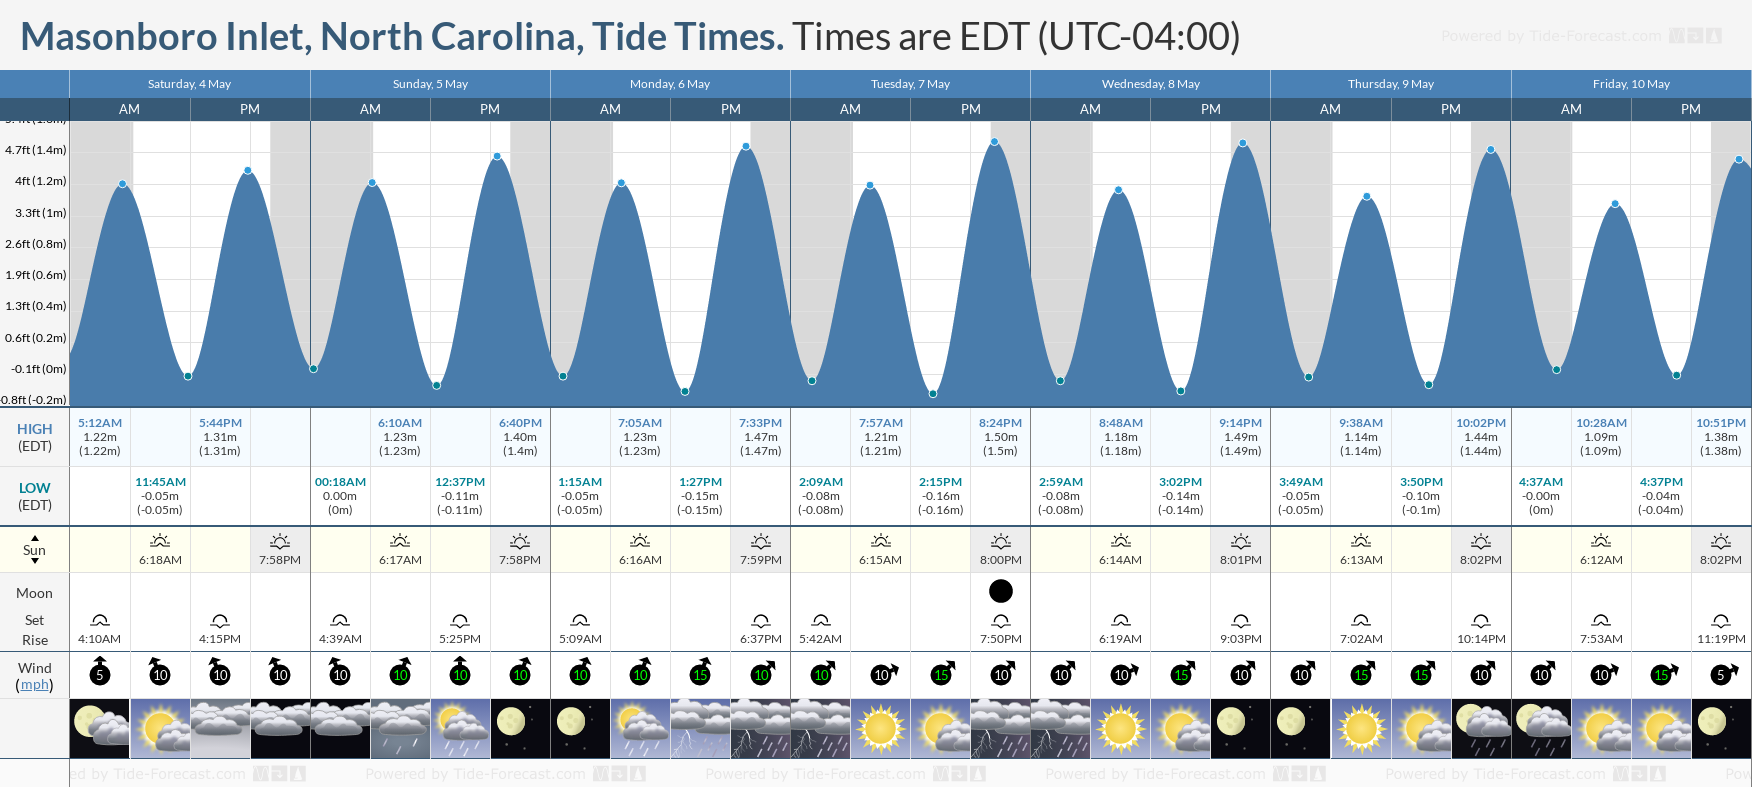 Masonboro Inlet, North Carolina Tide Chart including high and low tide tide times for the next 7 days